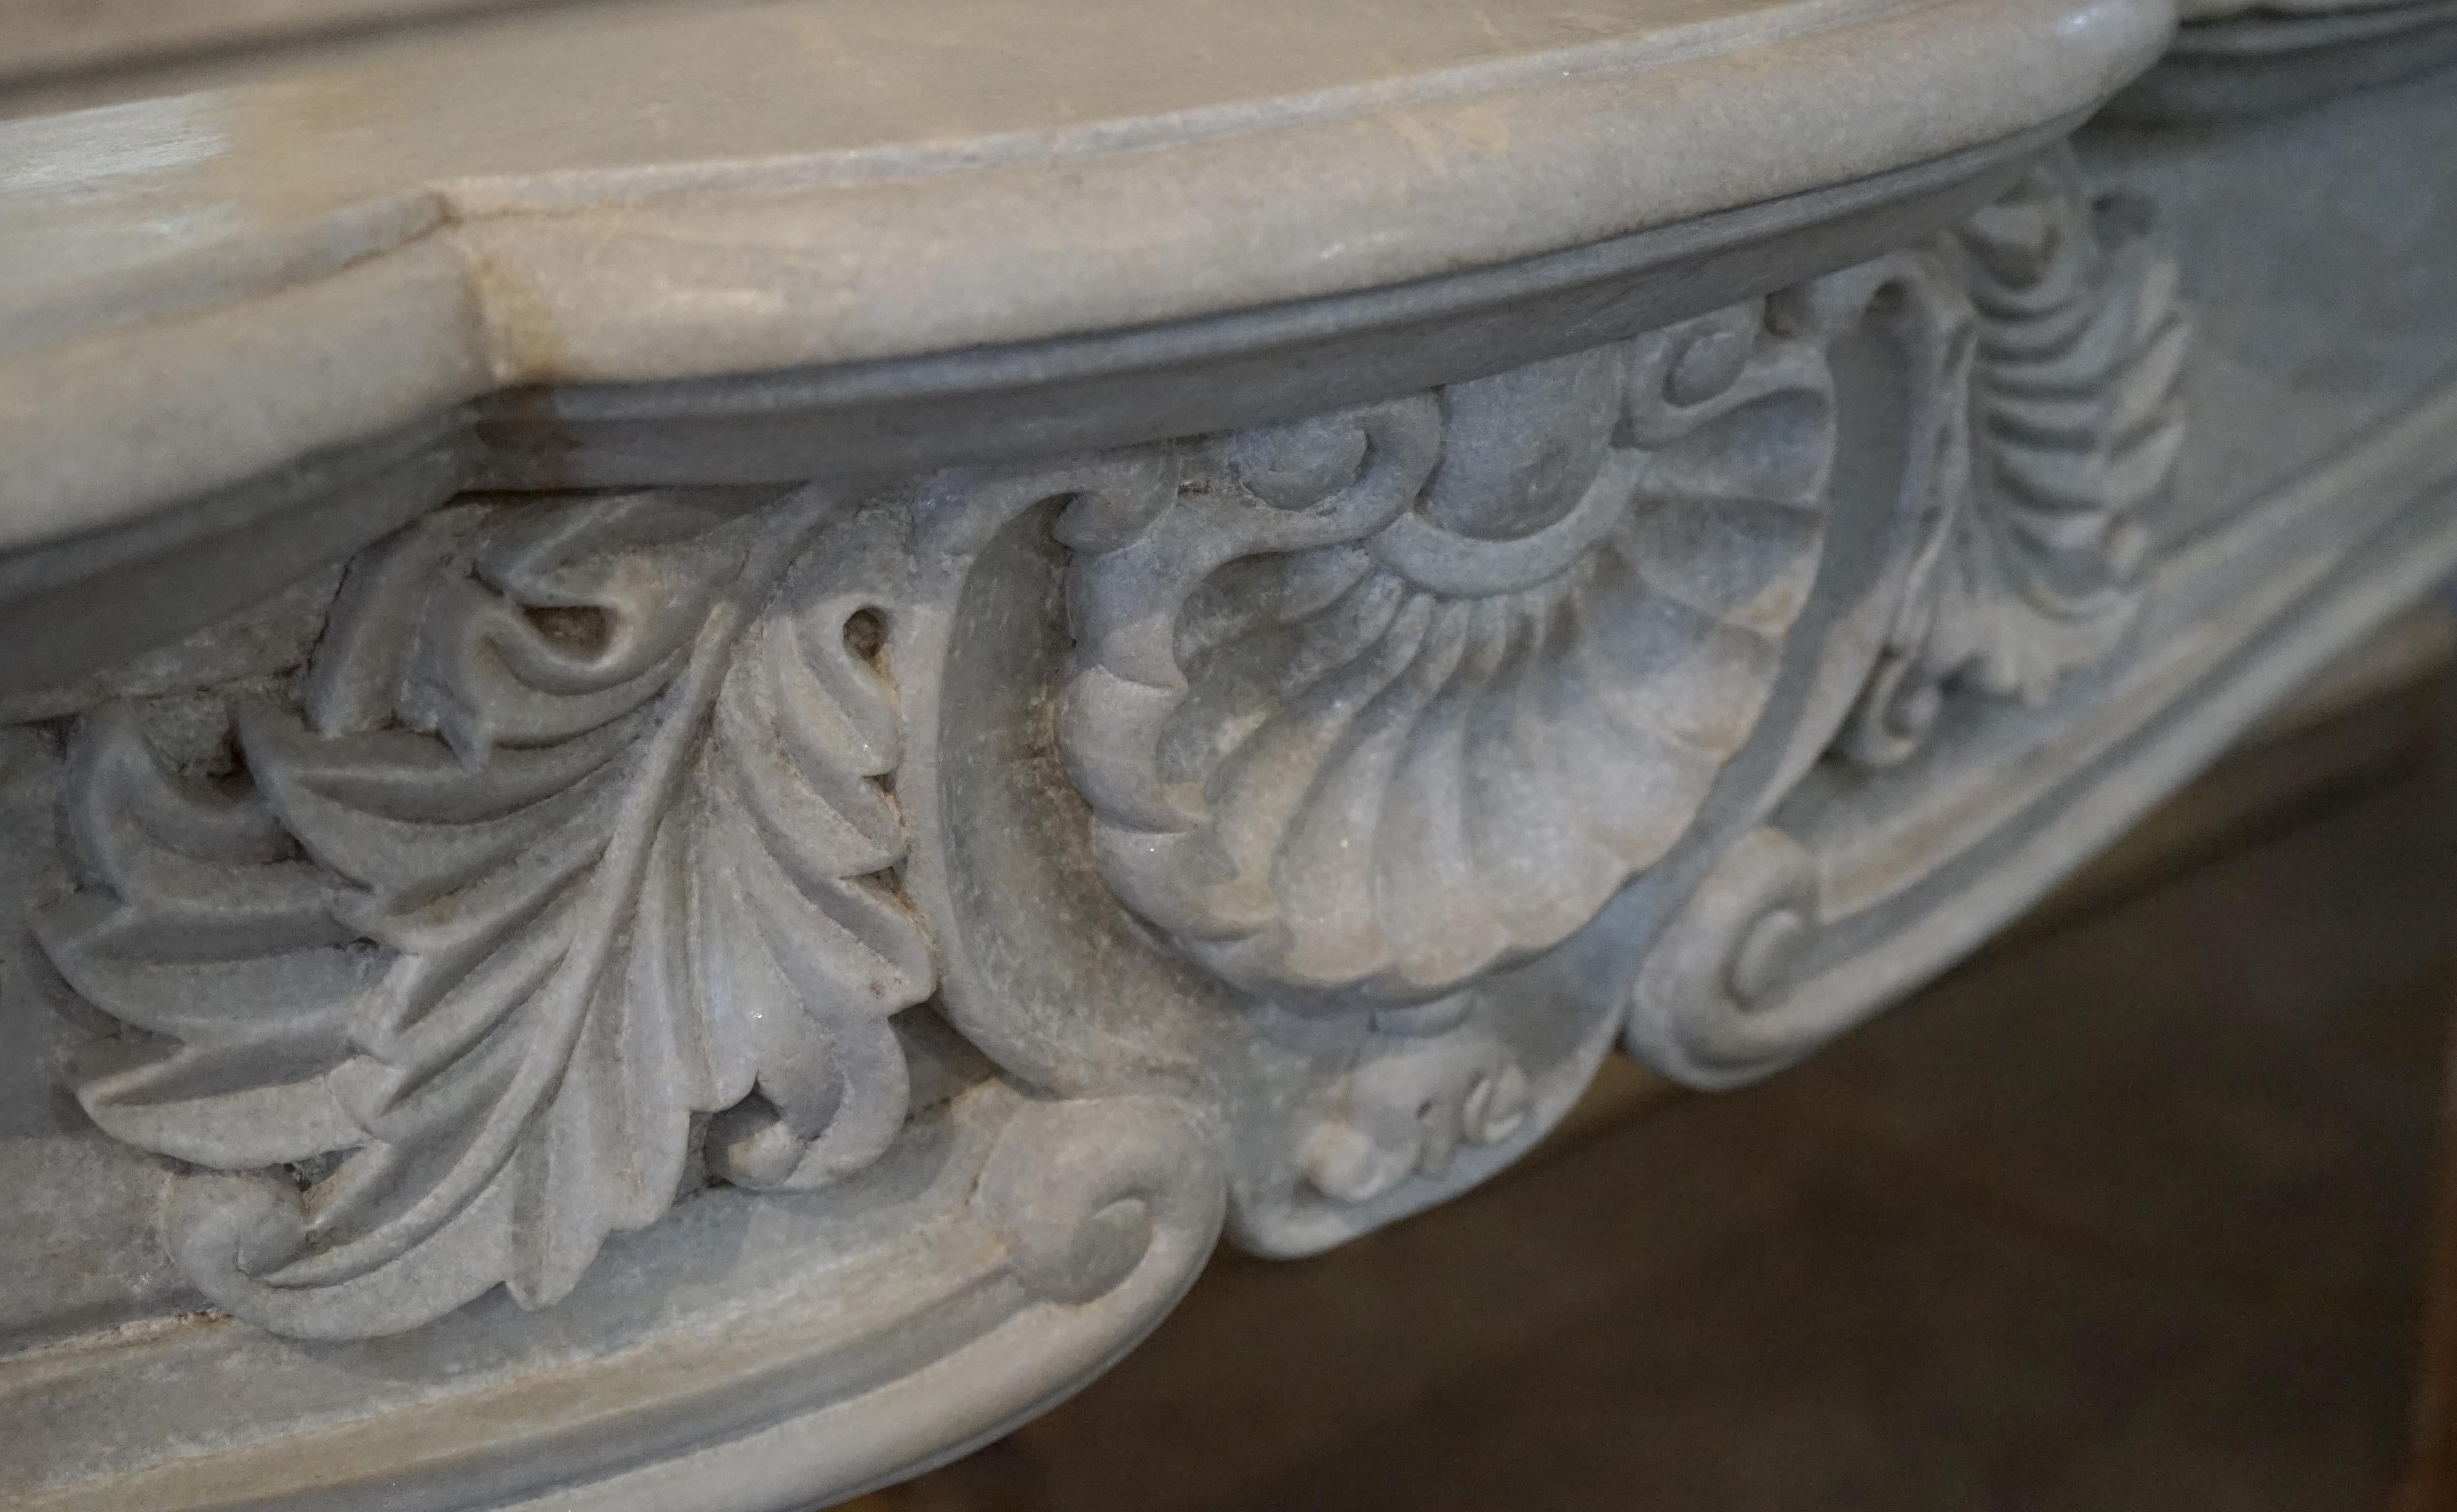 A fine 18th century Carrara marble mantelpiece
Carved in the Rococo style of a dove grey marble, this tall and leggy mantel has an elegant form with a shallow profile. The deeply carved entablature features a central design of leaves, shell and